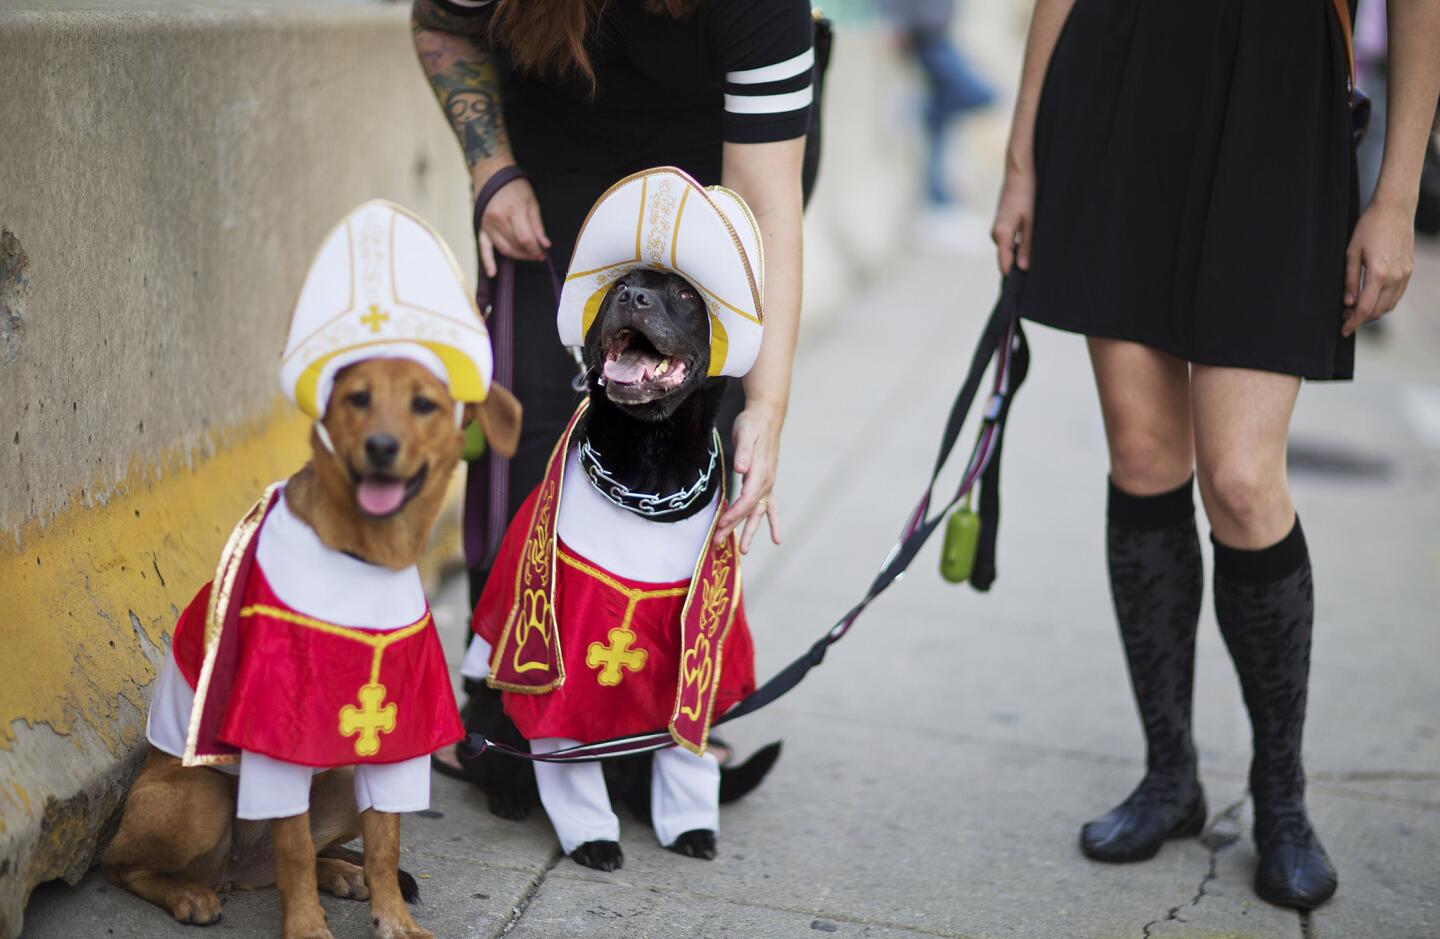 Bellatrix, right, has her costume adjusted by owner Ashley Spann while posing for photos for pedestrians with Addie, left, and owner Emily Mariani, right, outside the Pennsylvania Convention Center, host of the World Meeting of Families conference Sept. 25, 2015, in Philadelphia.